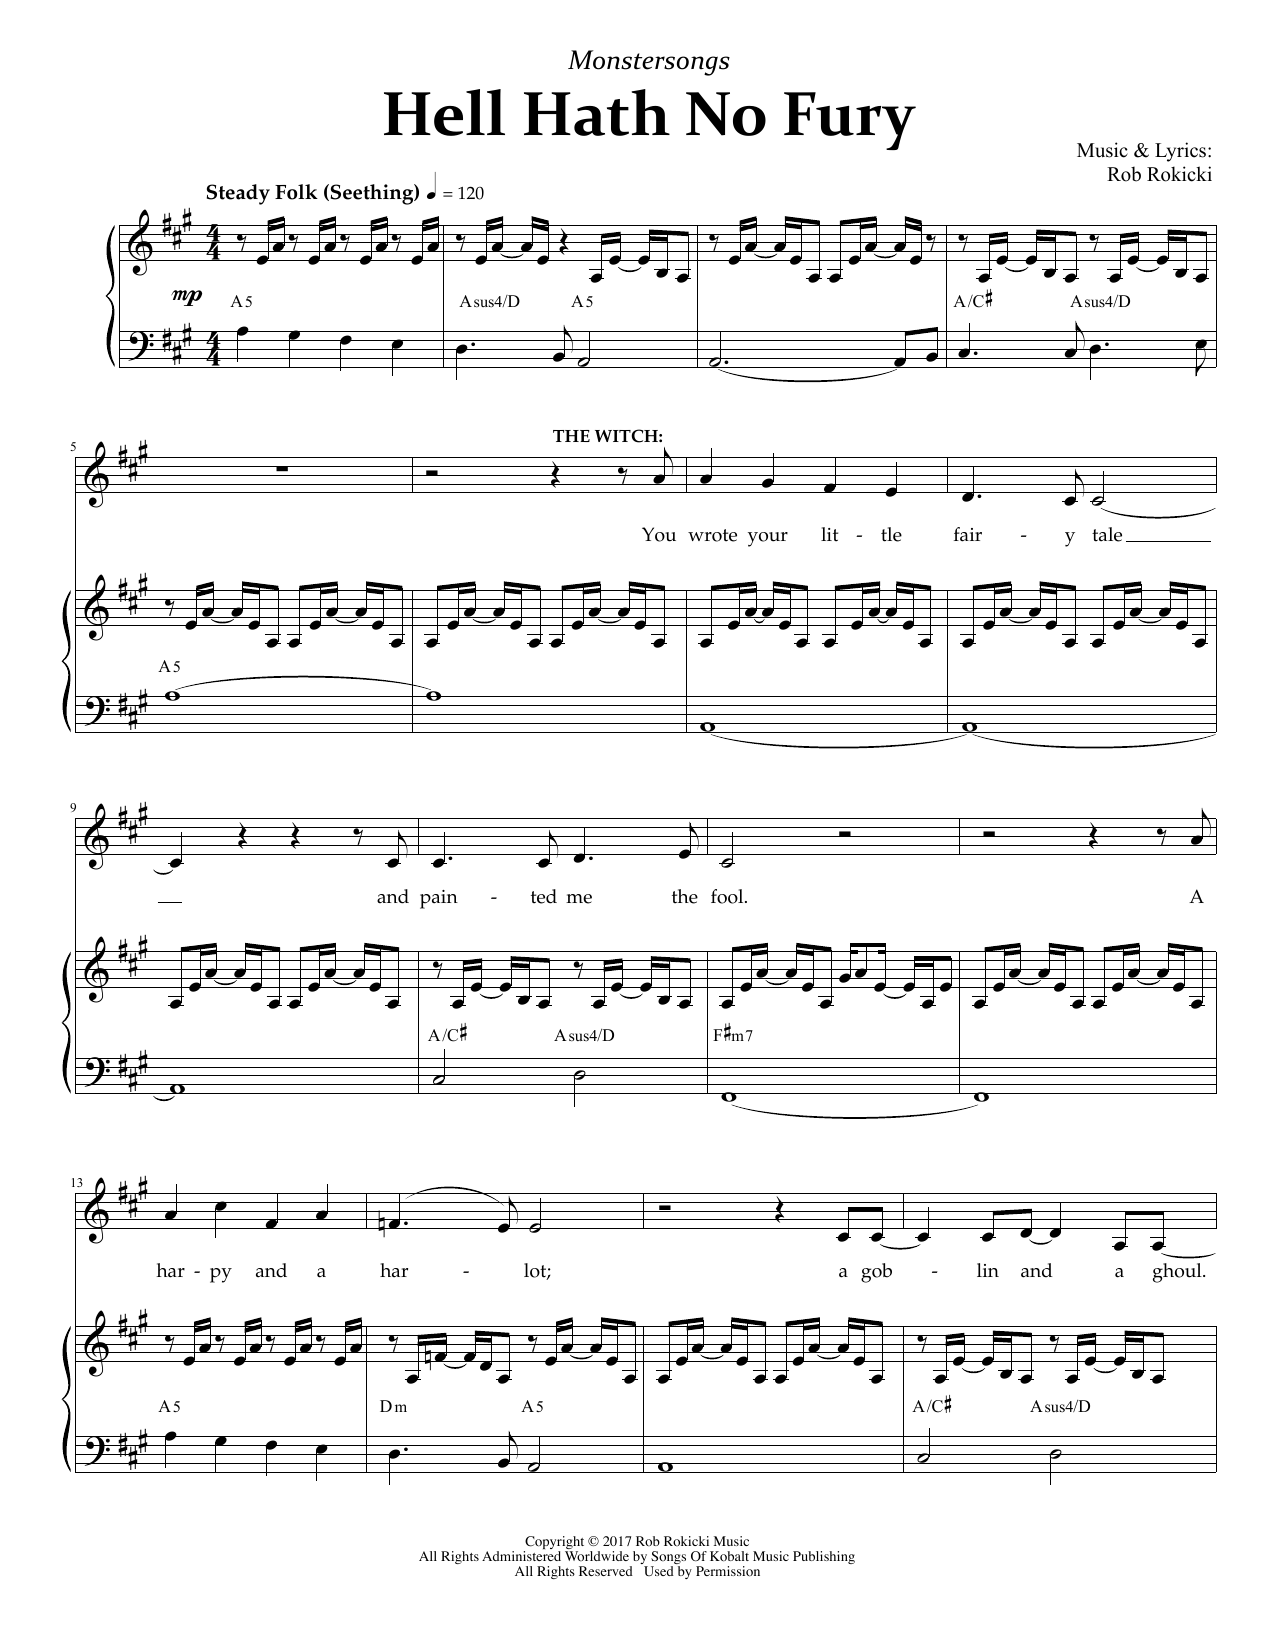 Download Rob Rokicki Hell Hath No Fury (from Monstersongs) Sheet Music